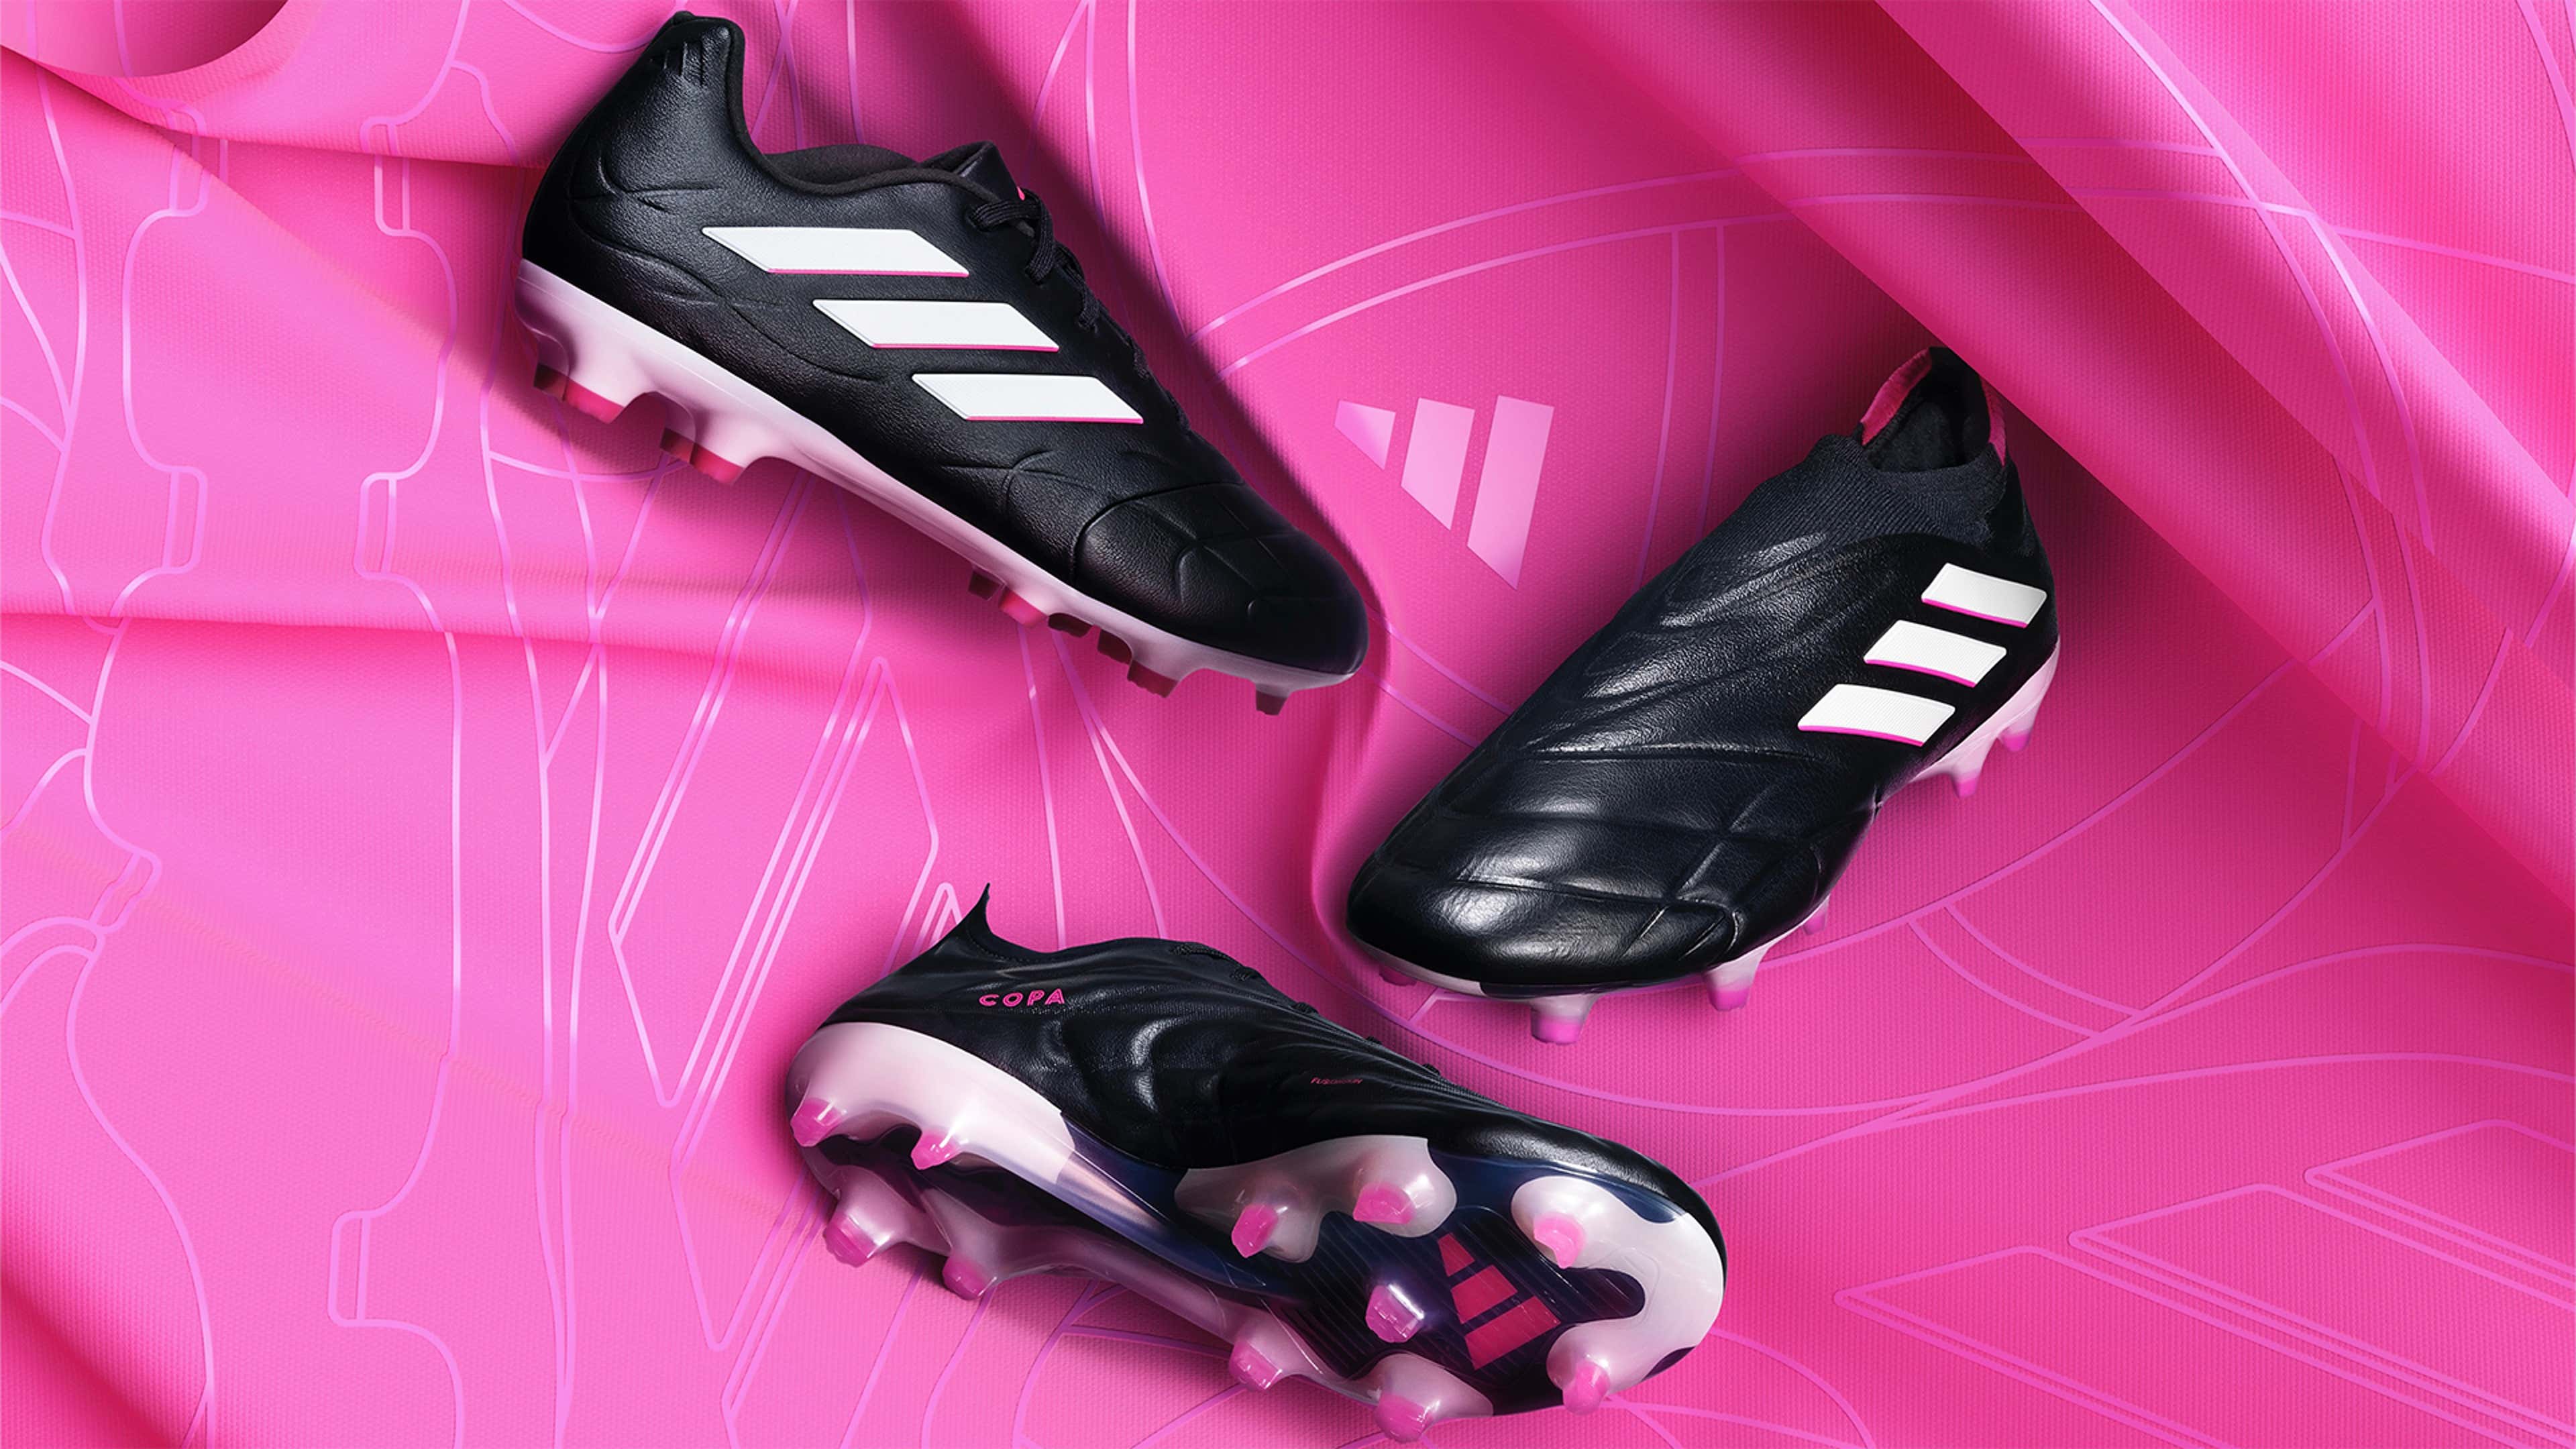 seng forurening Intensiv adidas expands the COPA line with three new COPA Pure colourways | Goal.com